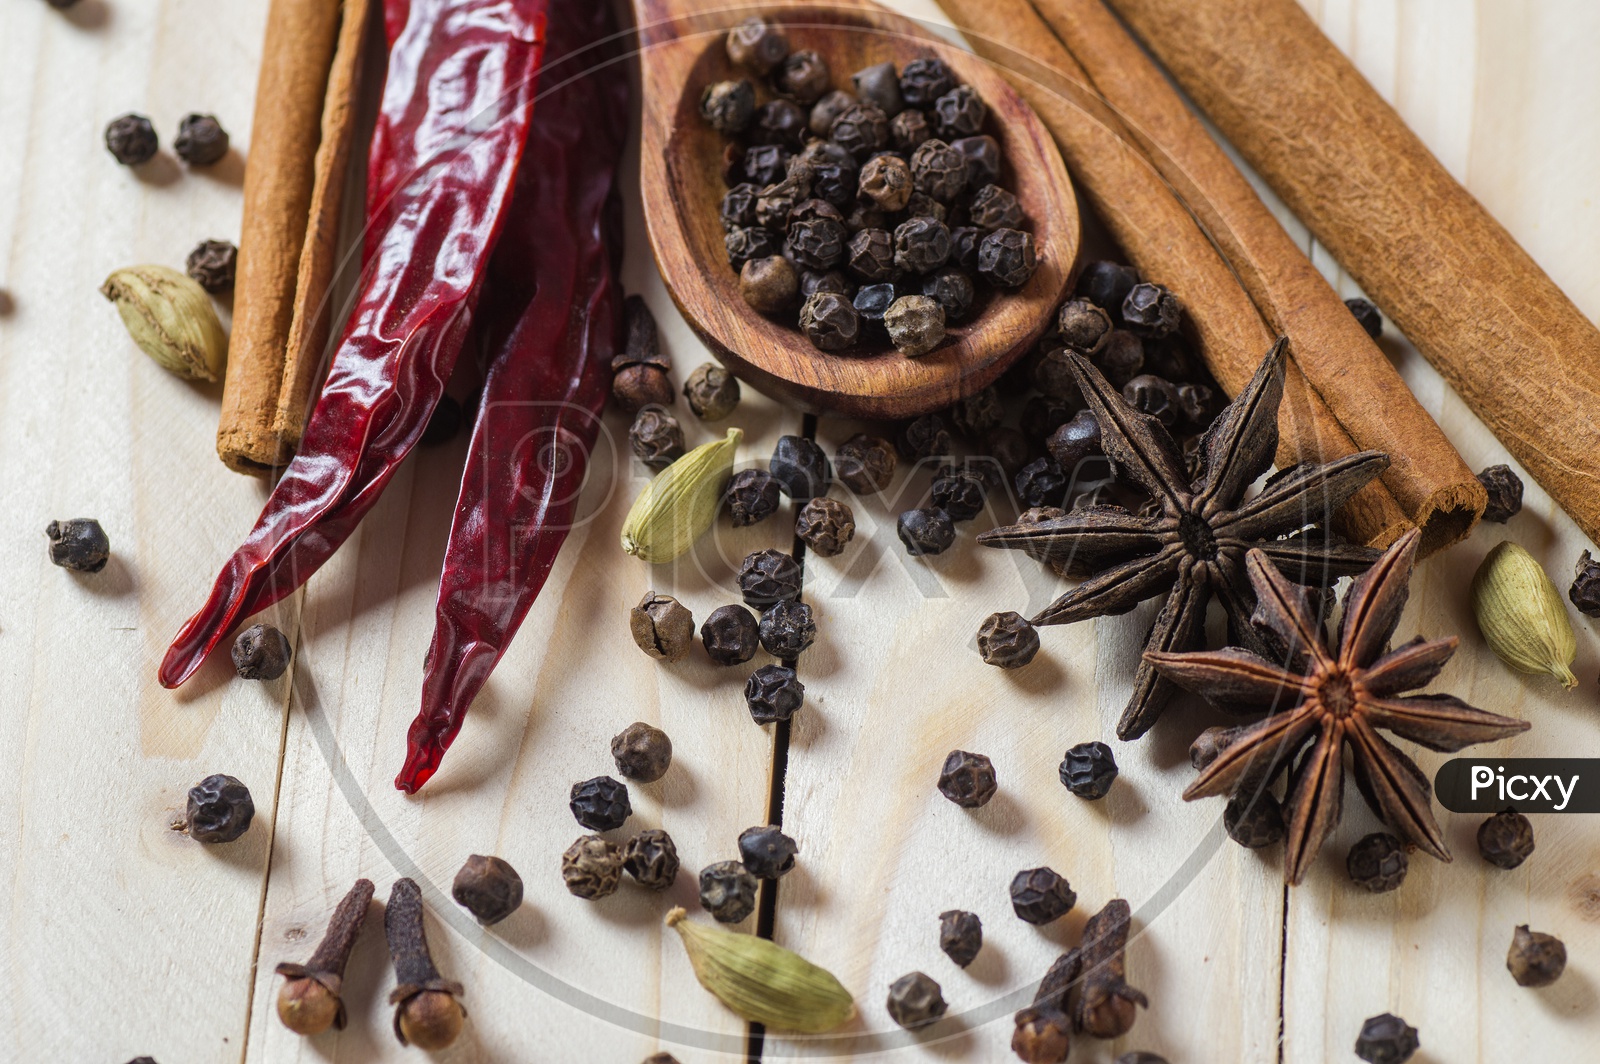 Cinnamon stick, Dried Red Chili, Star Anise, Cloves, Elachi